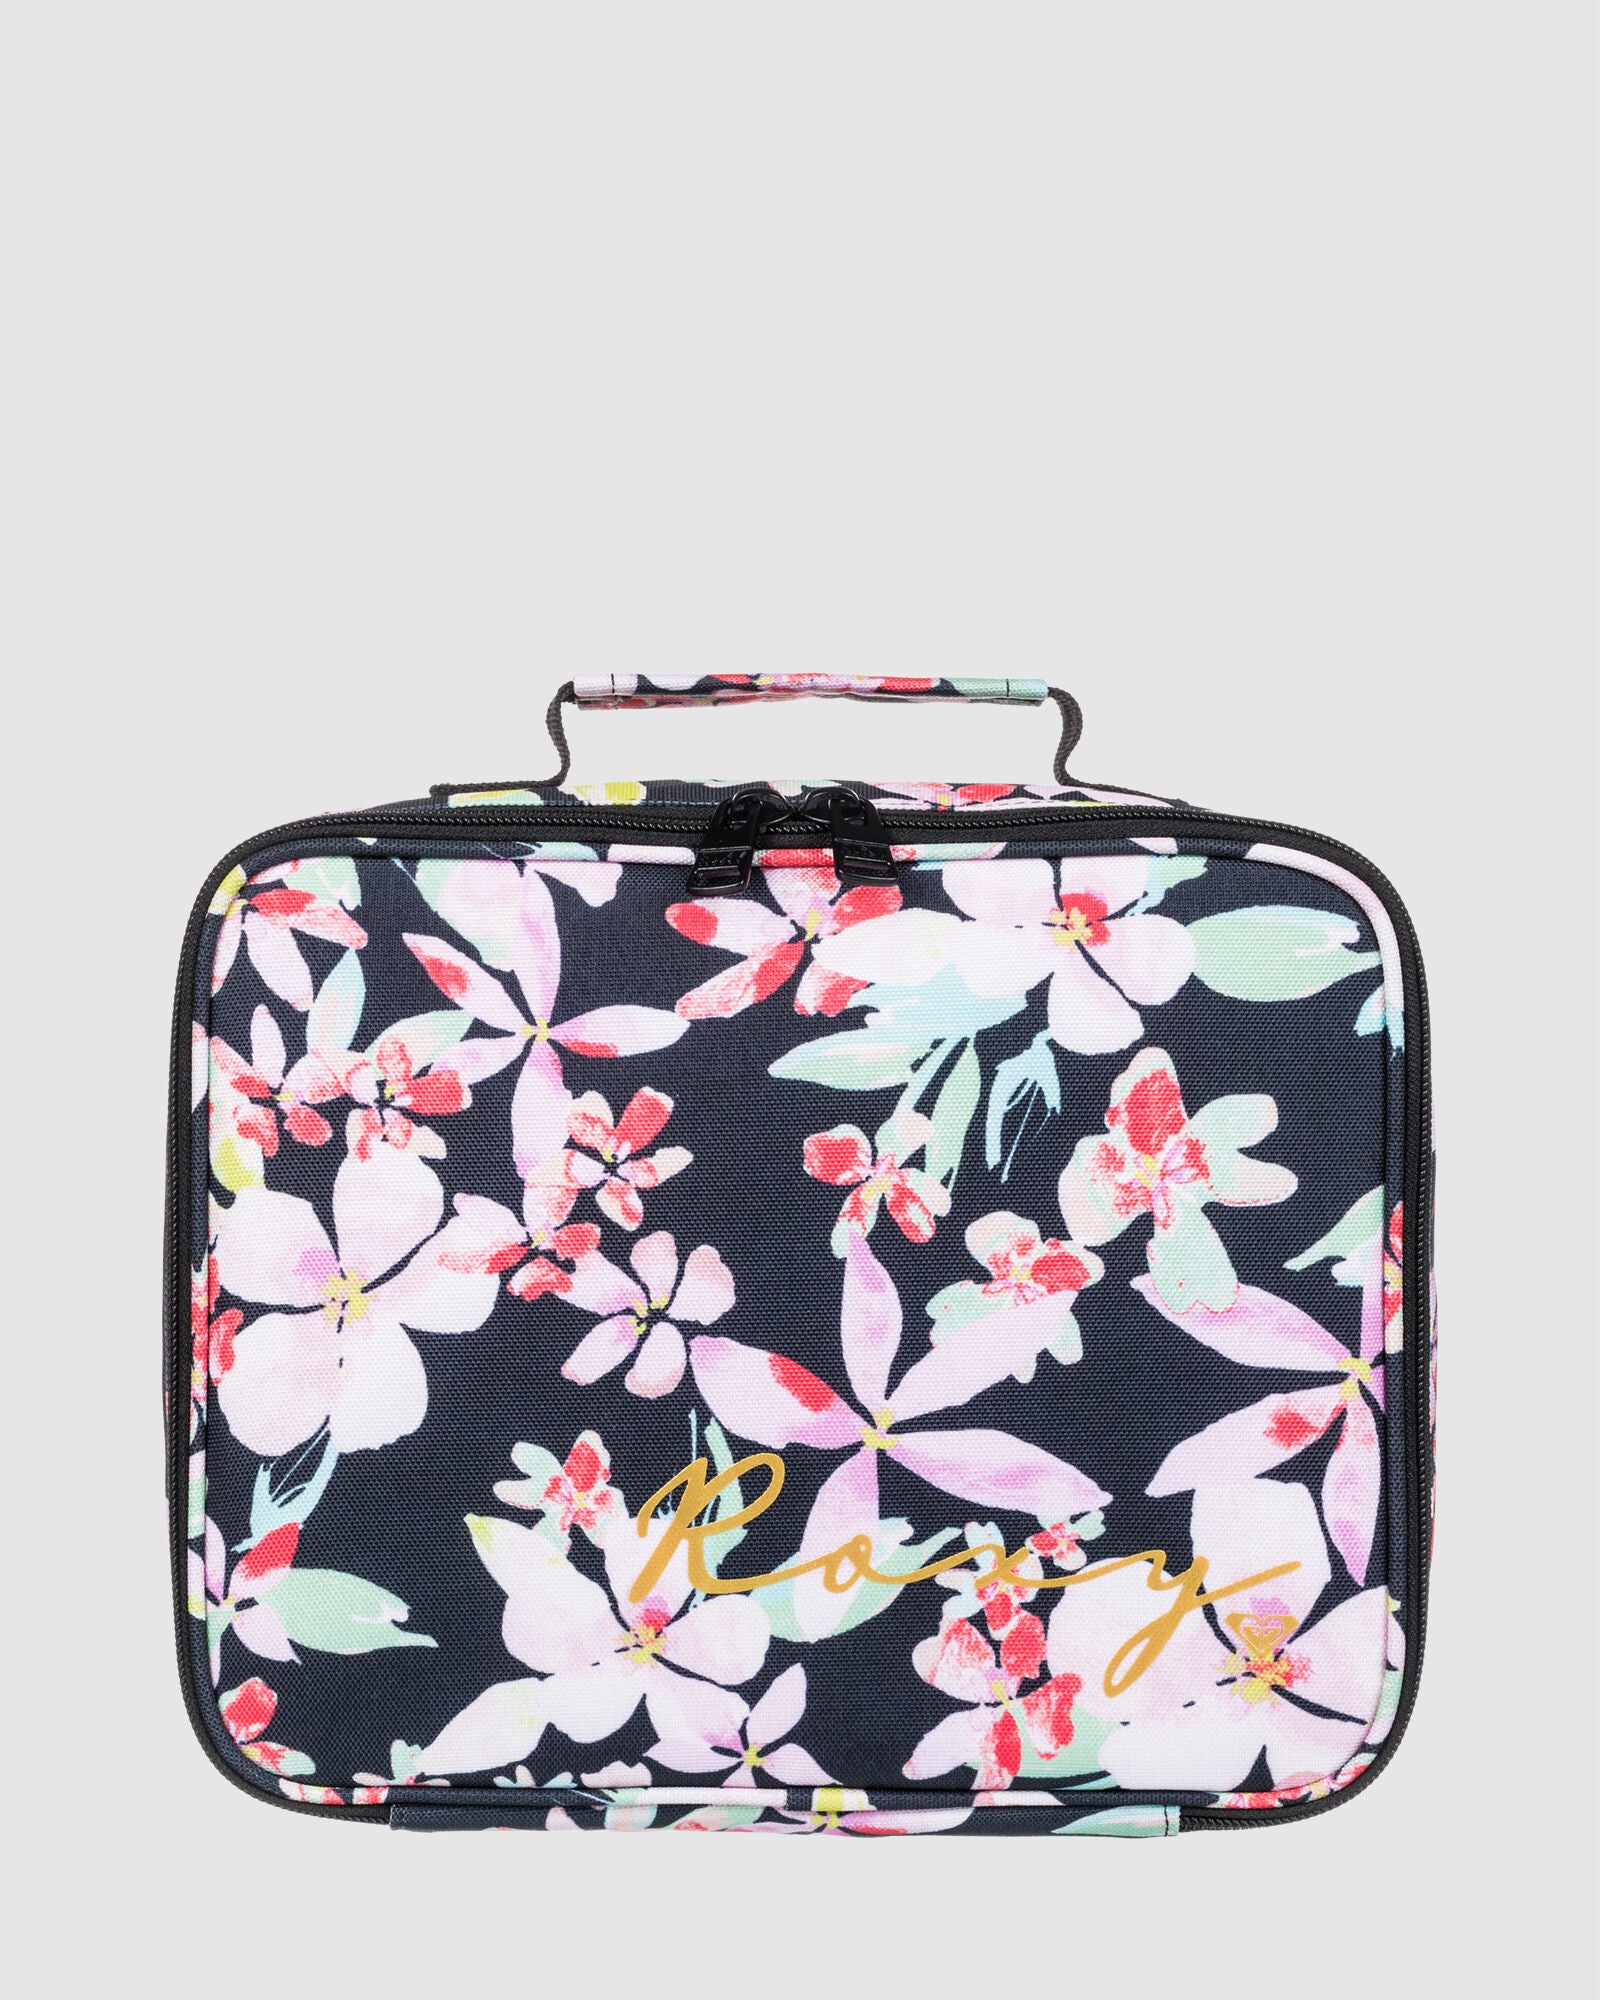 100% Recycled Polyester groove in life lunch box roxy floral cooler bag